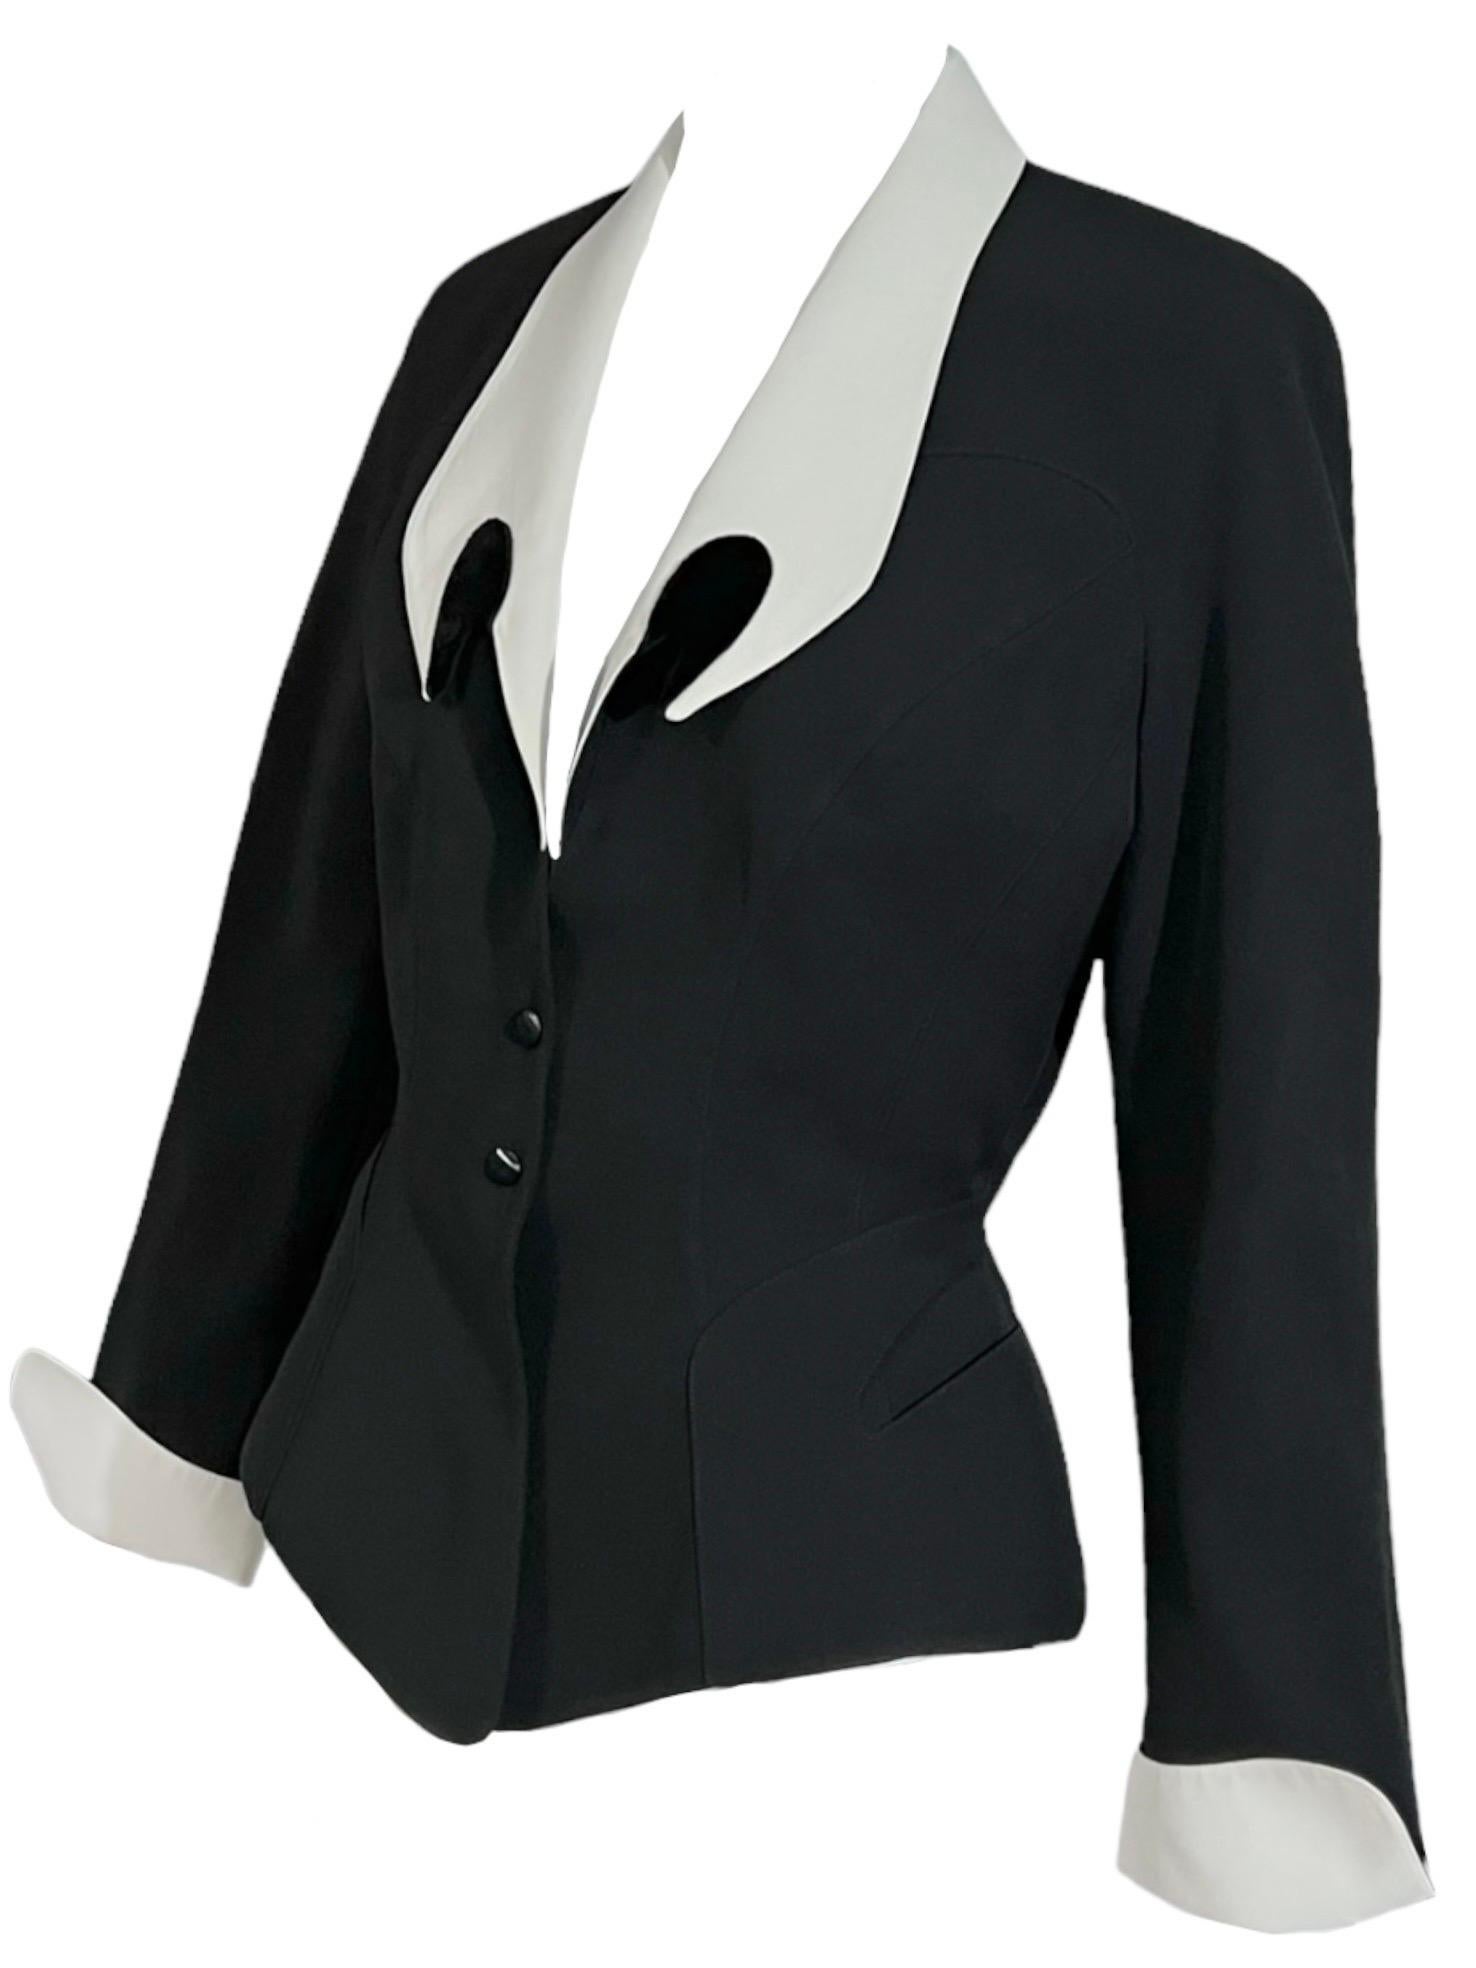 Women's S/S 1992 Thierry Mugler Black Runway Jacket Dramatic White Collar For Sale